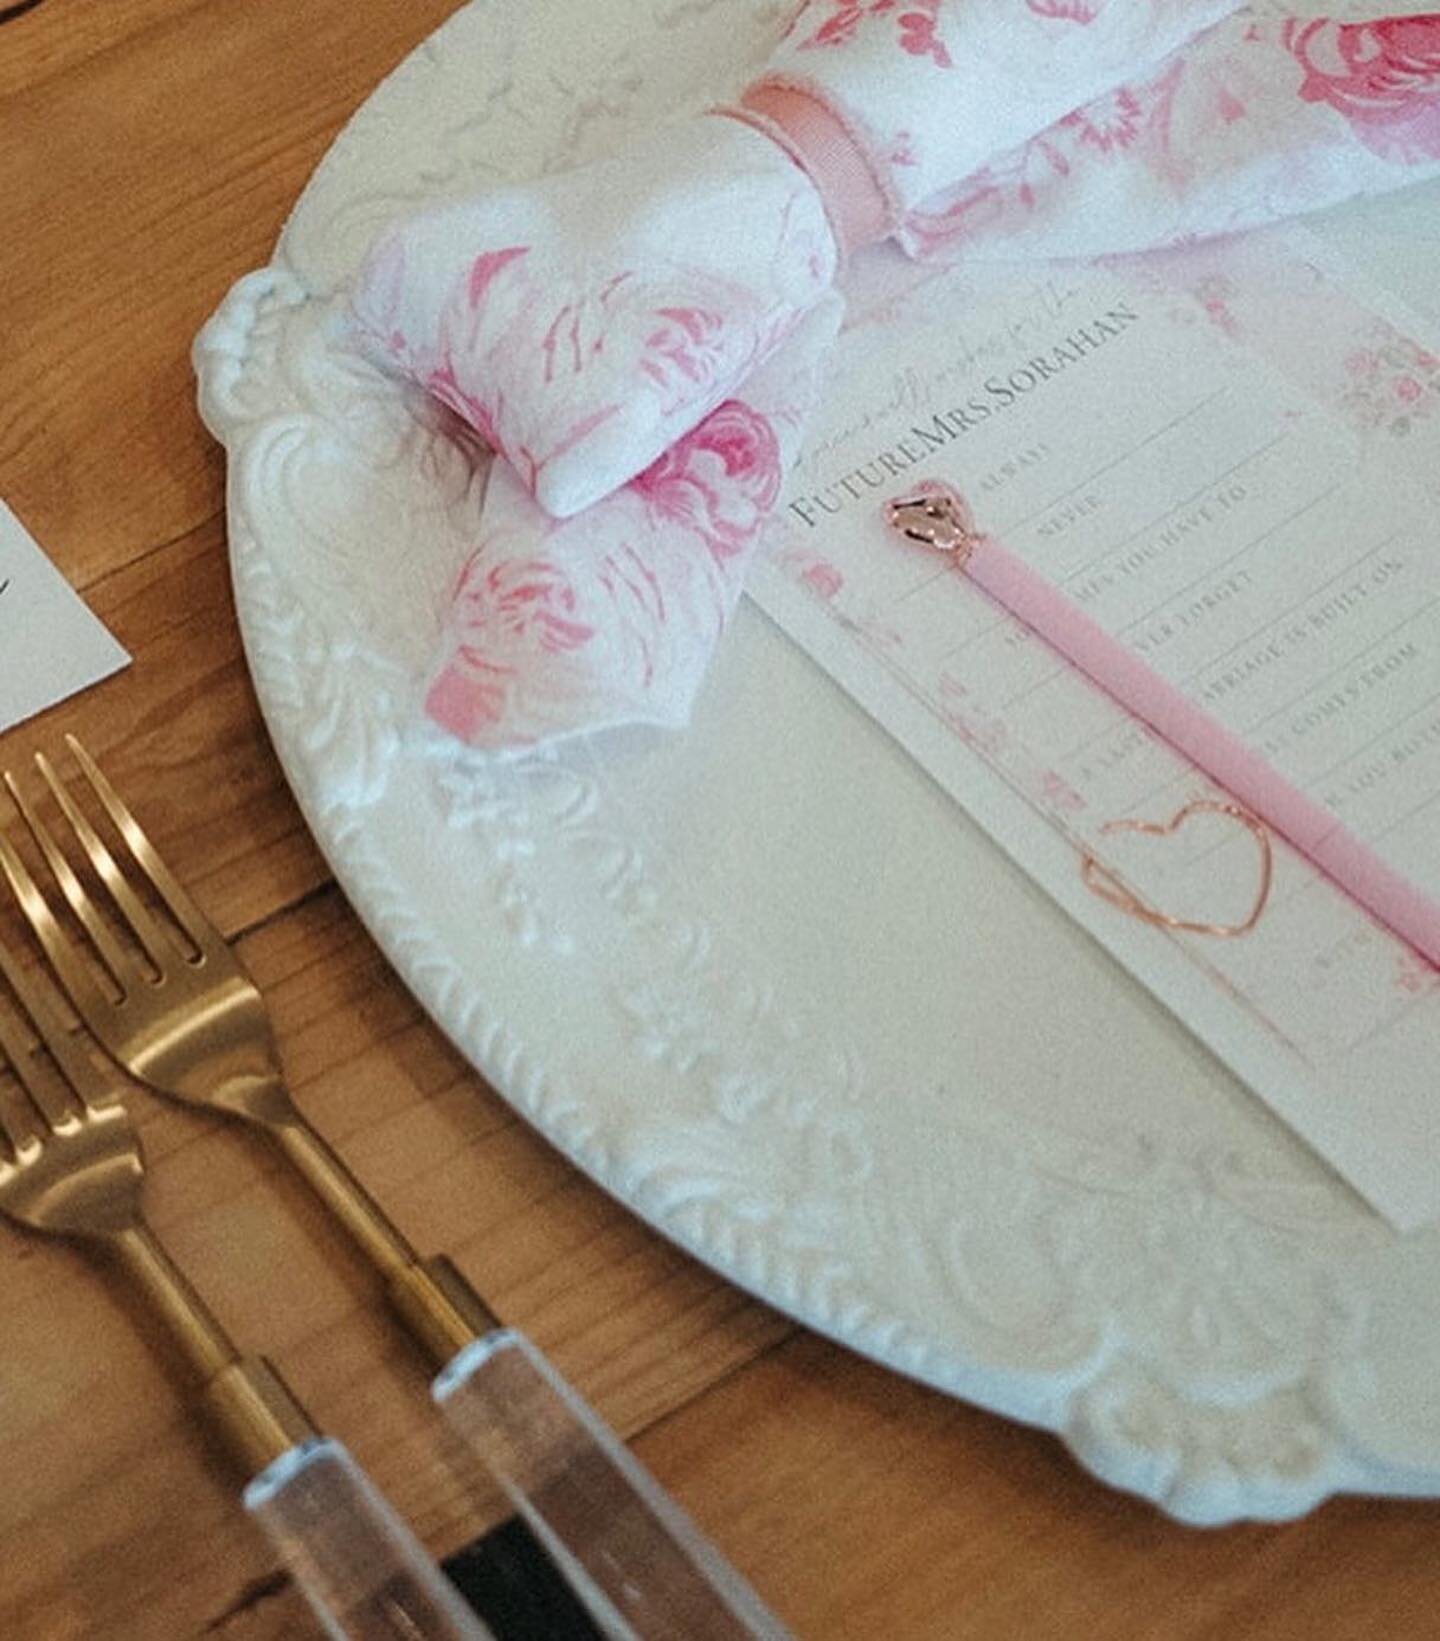 🎀🎀🎀

featuring our ROSE floral napkin, VERA pressed wood charger, LIV acrylic flatware and ELLIE pink vintage goblet

ALL AVAILABLE FOR RENT AT
www.tabletalkrentals.com

@whalersny
@stephanielawrencephoto 

#newyorkweddings #longislandwedding #tab